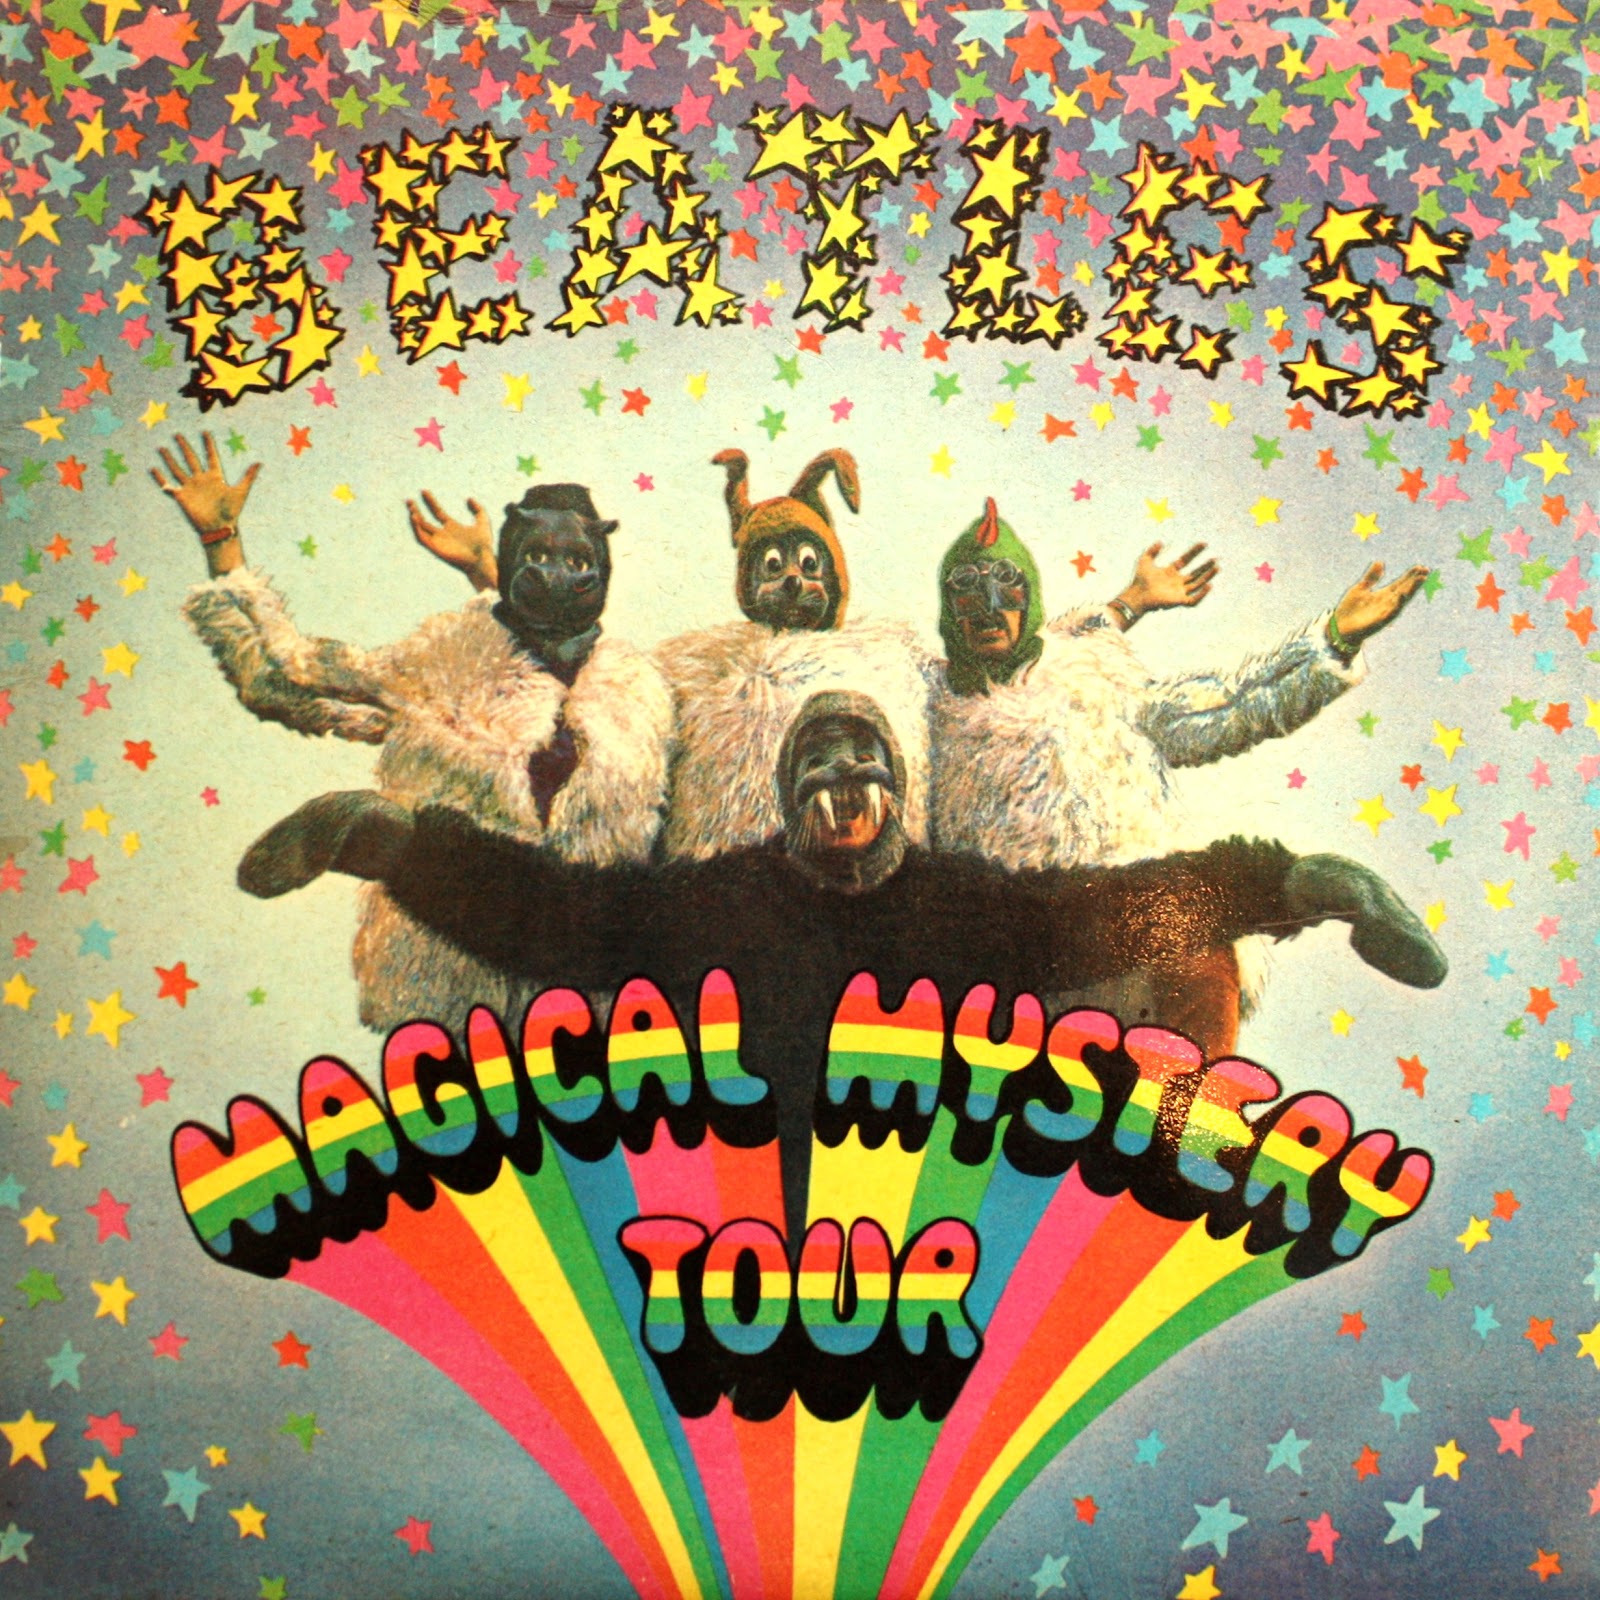 magical mystery tour history